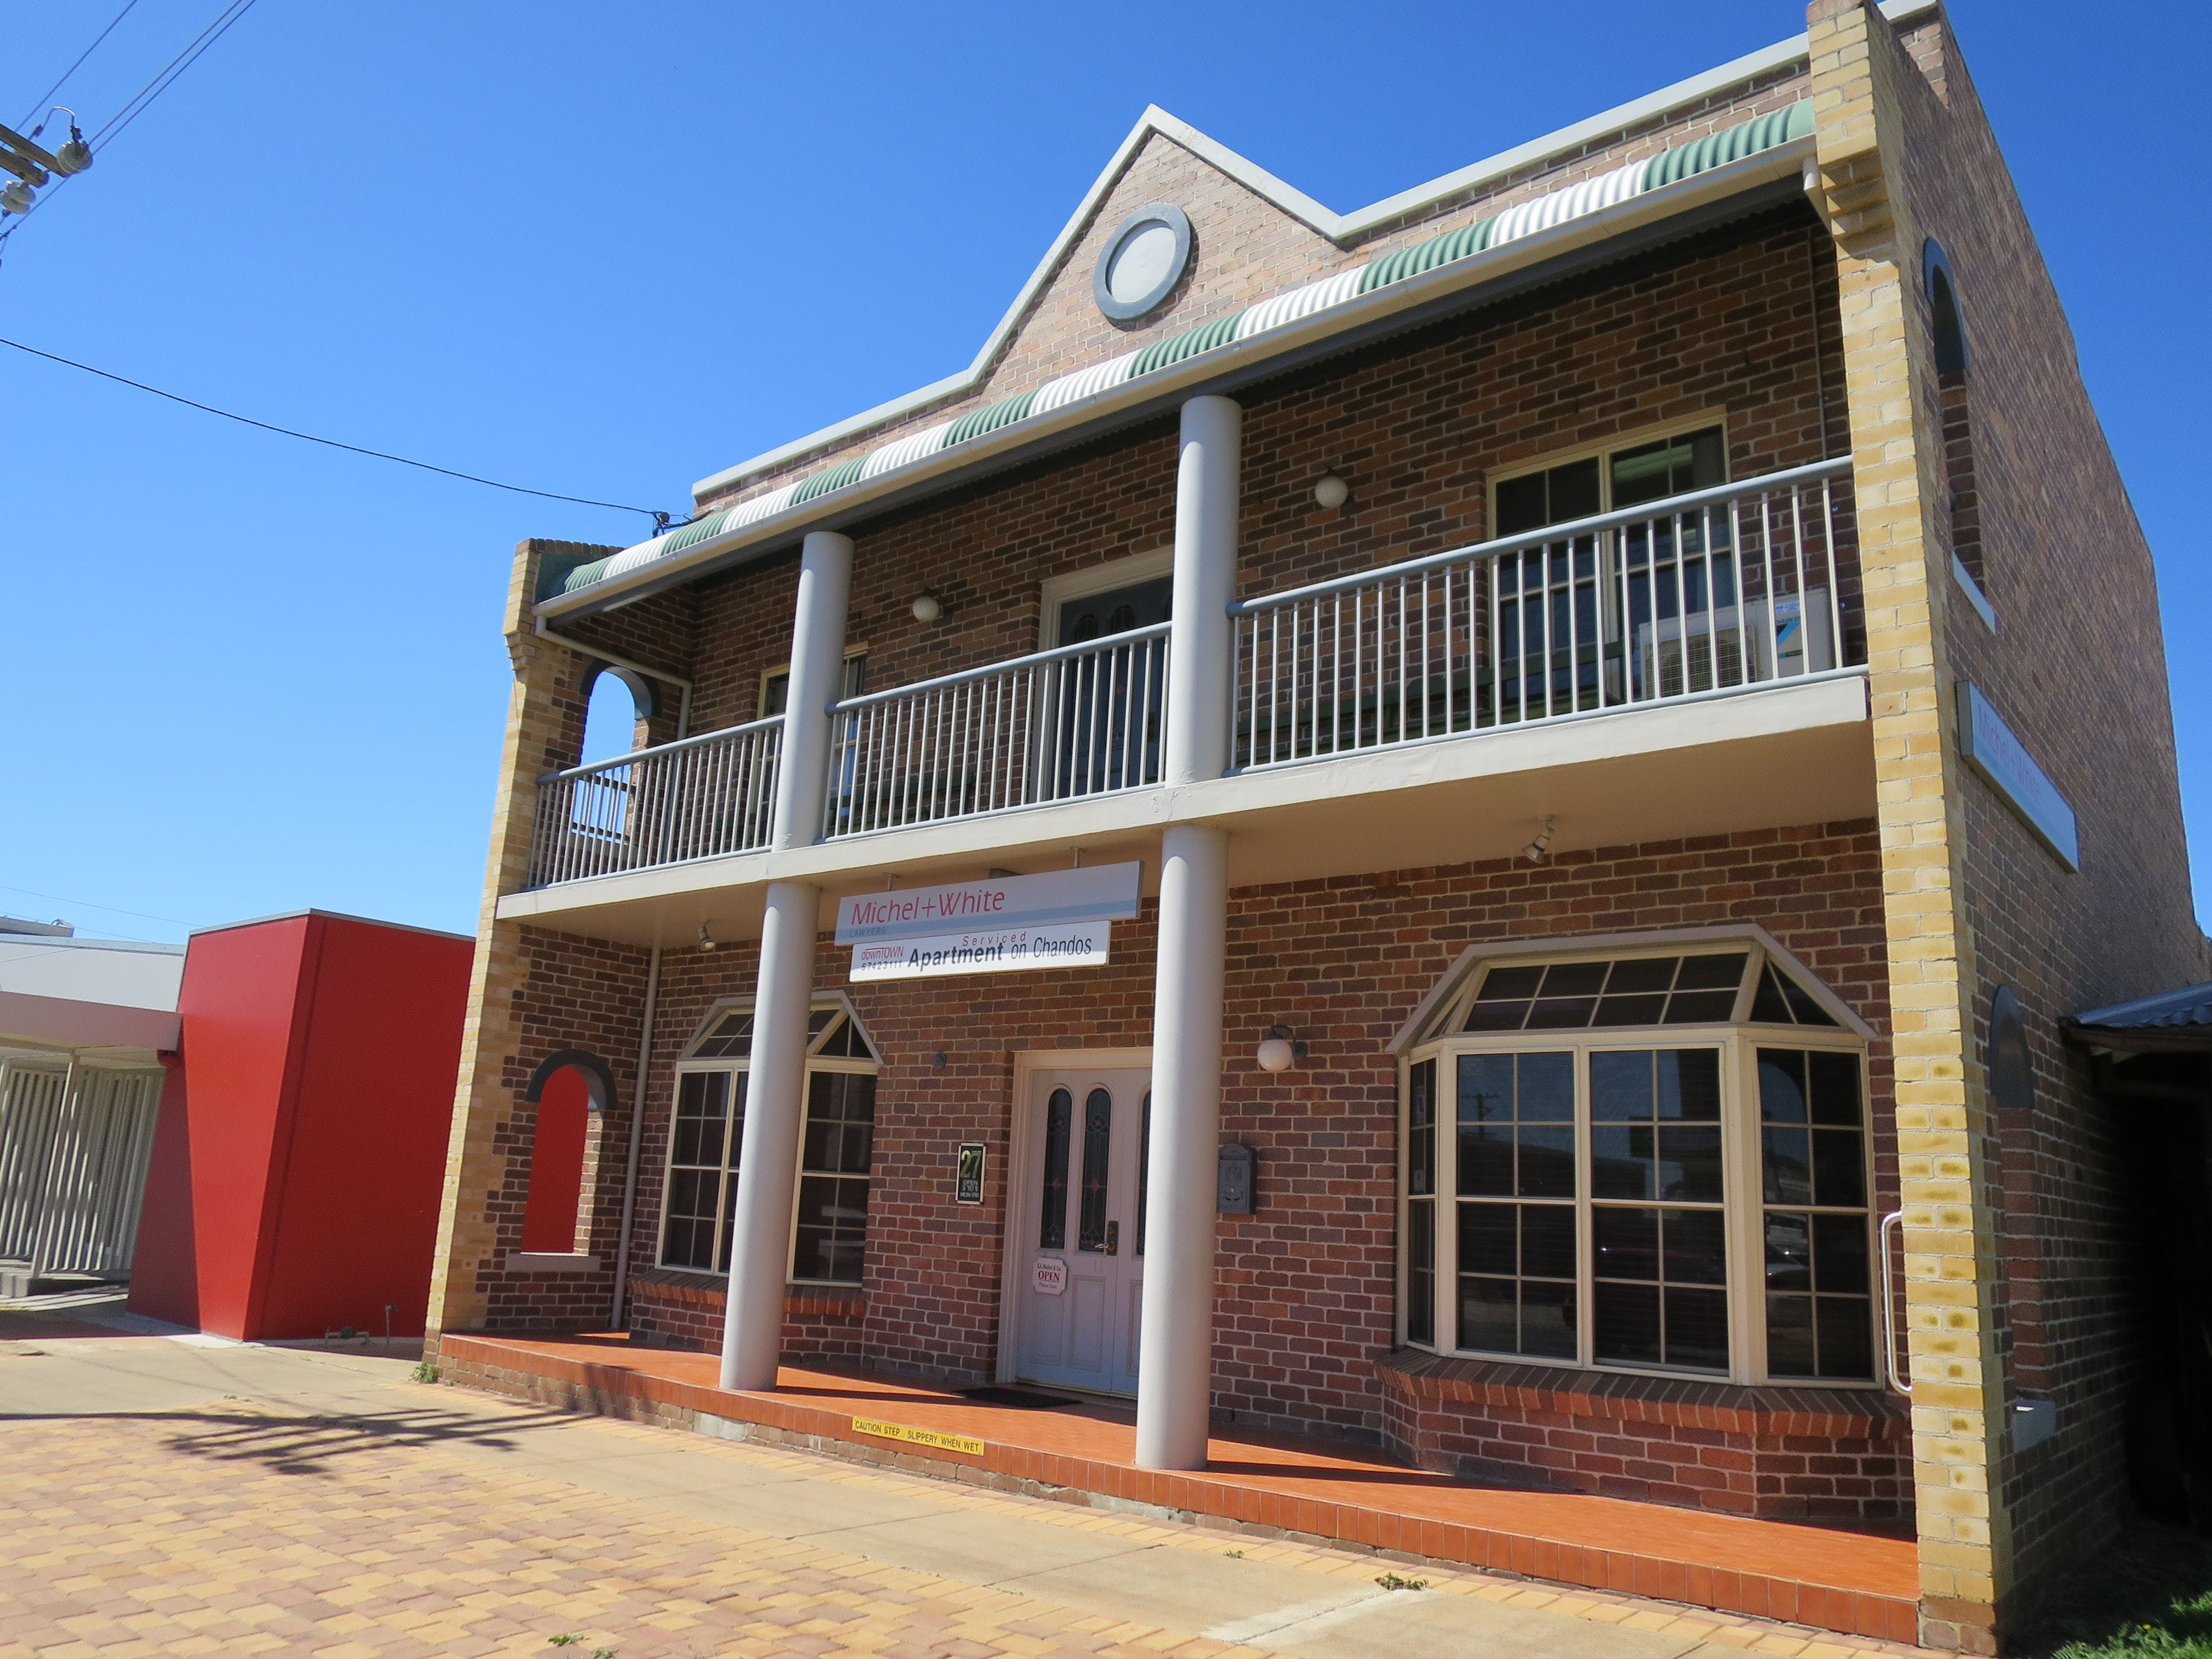 Downtown Apartment on Chandos - Accommodation Port Hedland